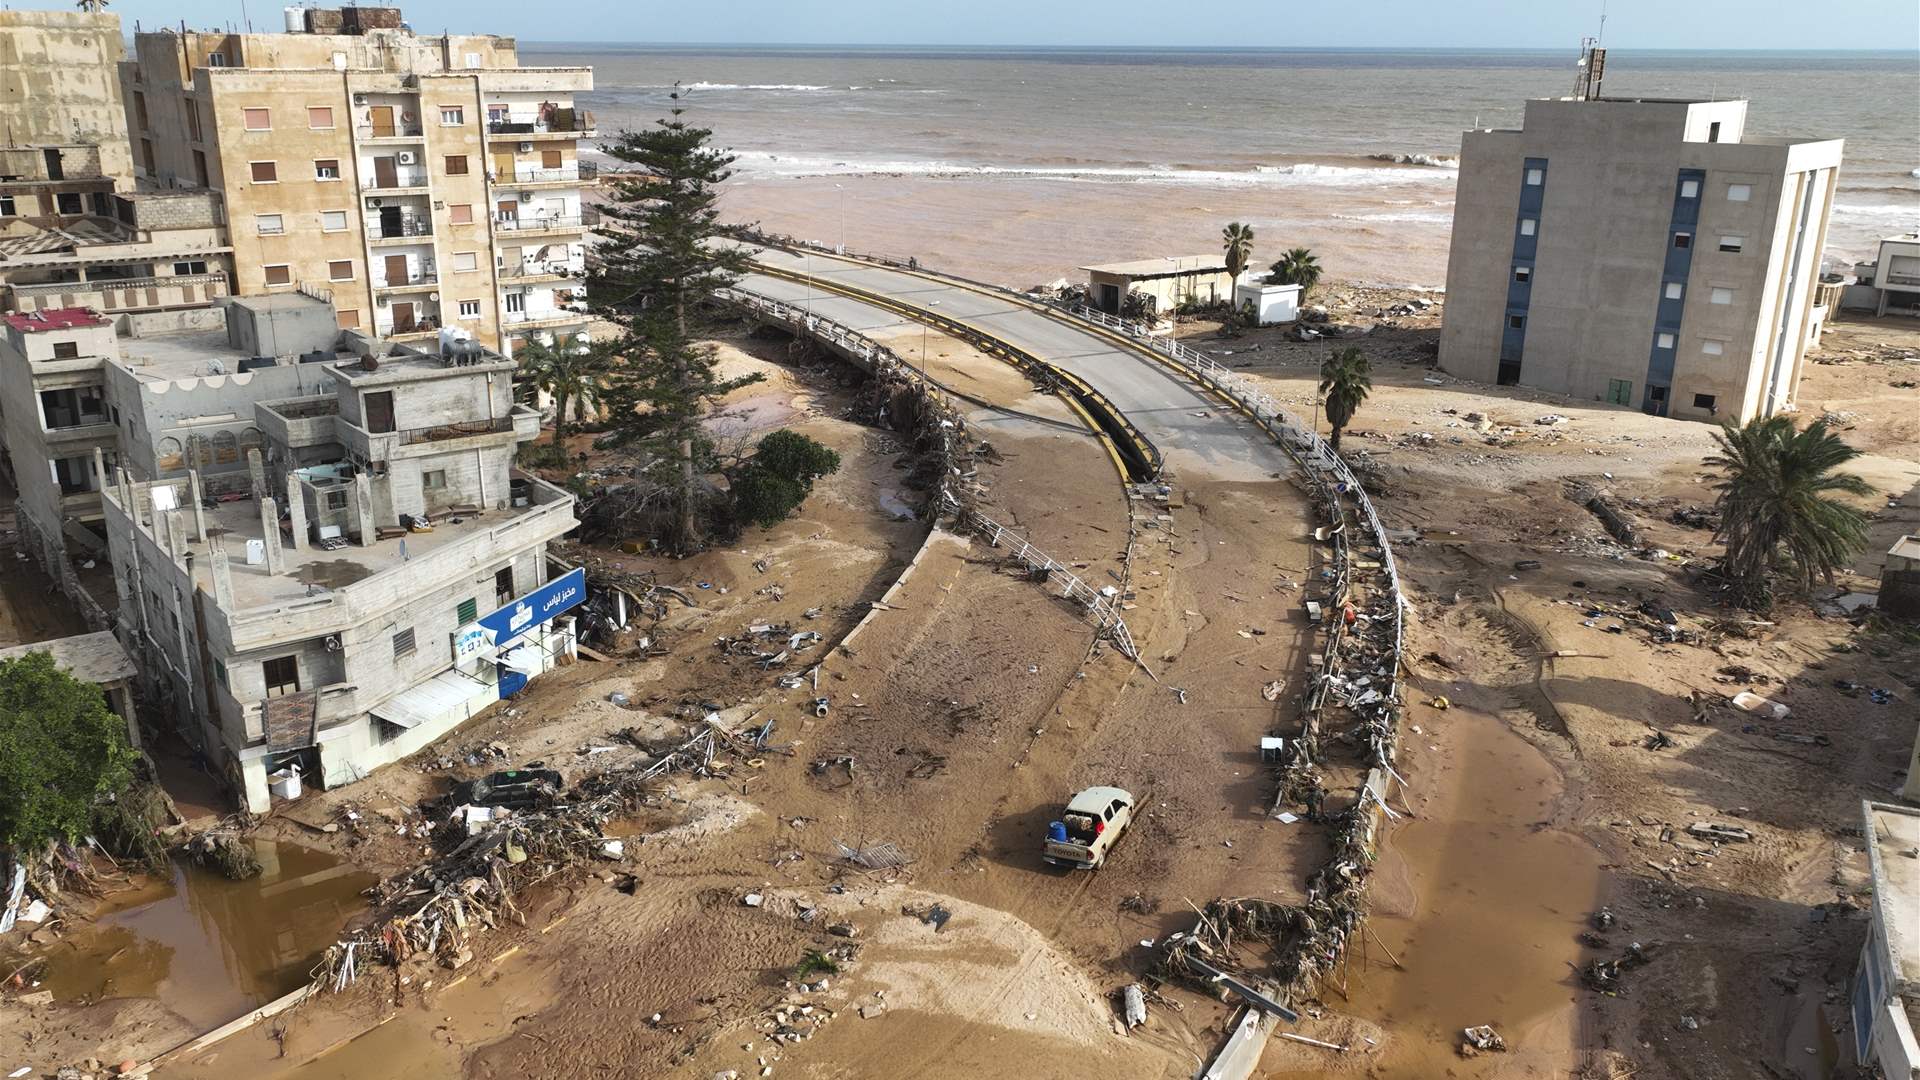 UN: Most deaths in Libya’s floods could have been avoided